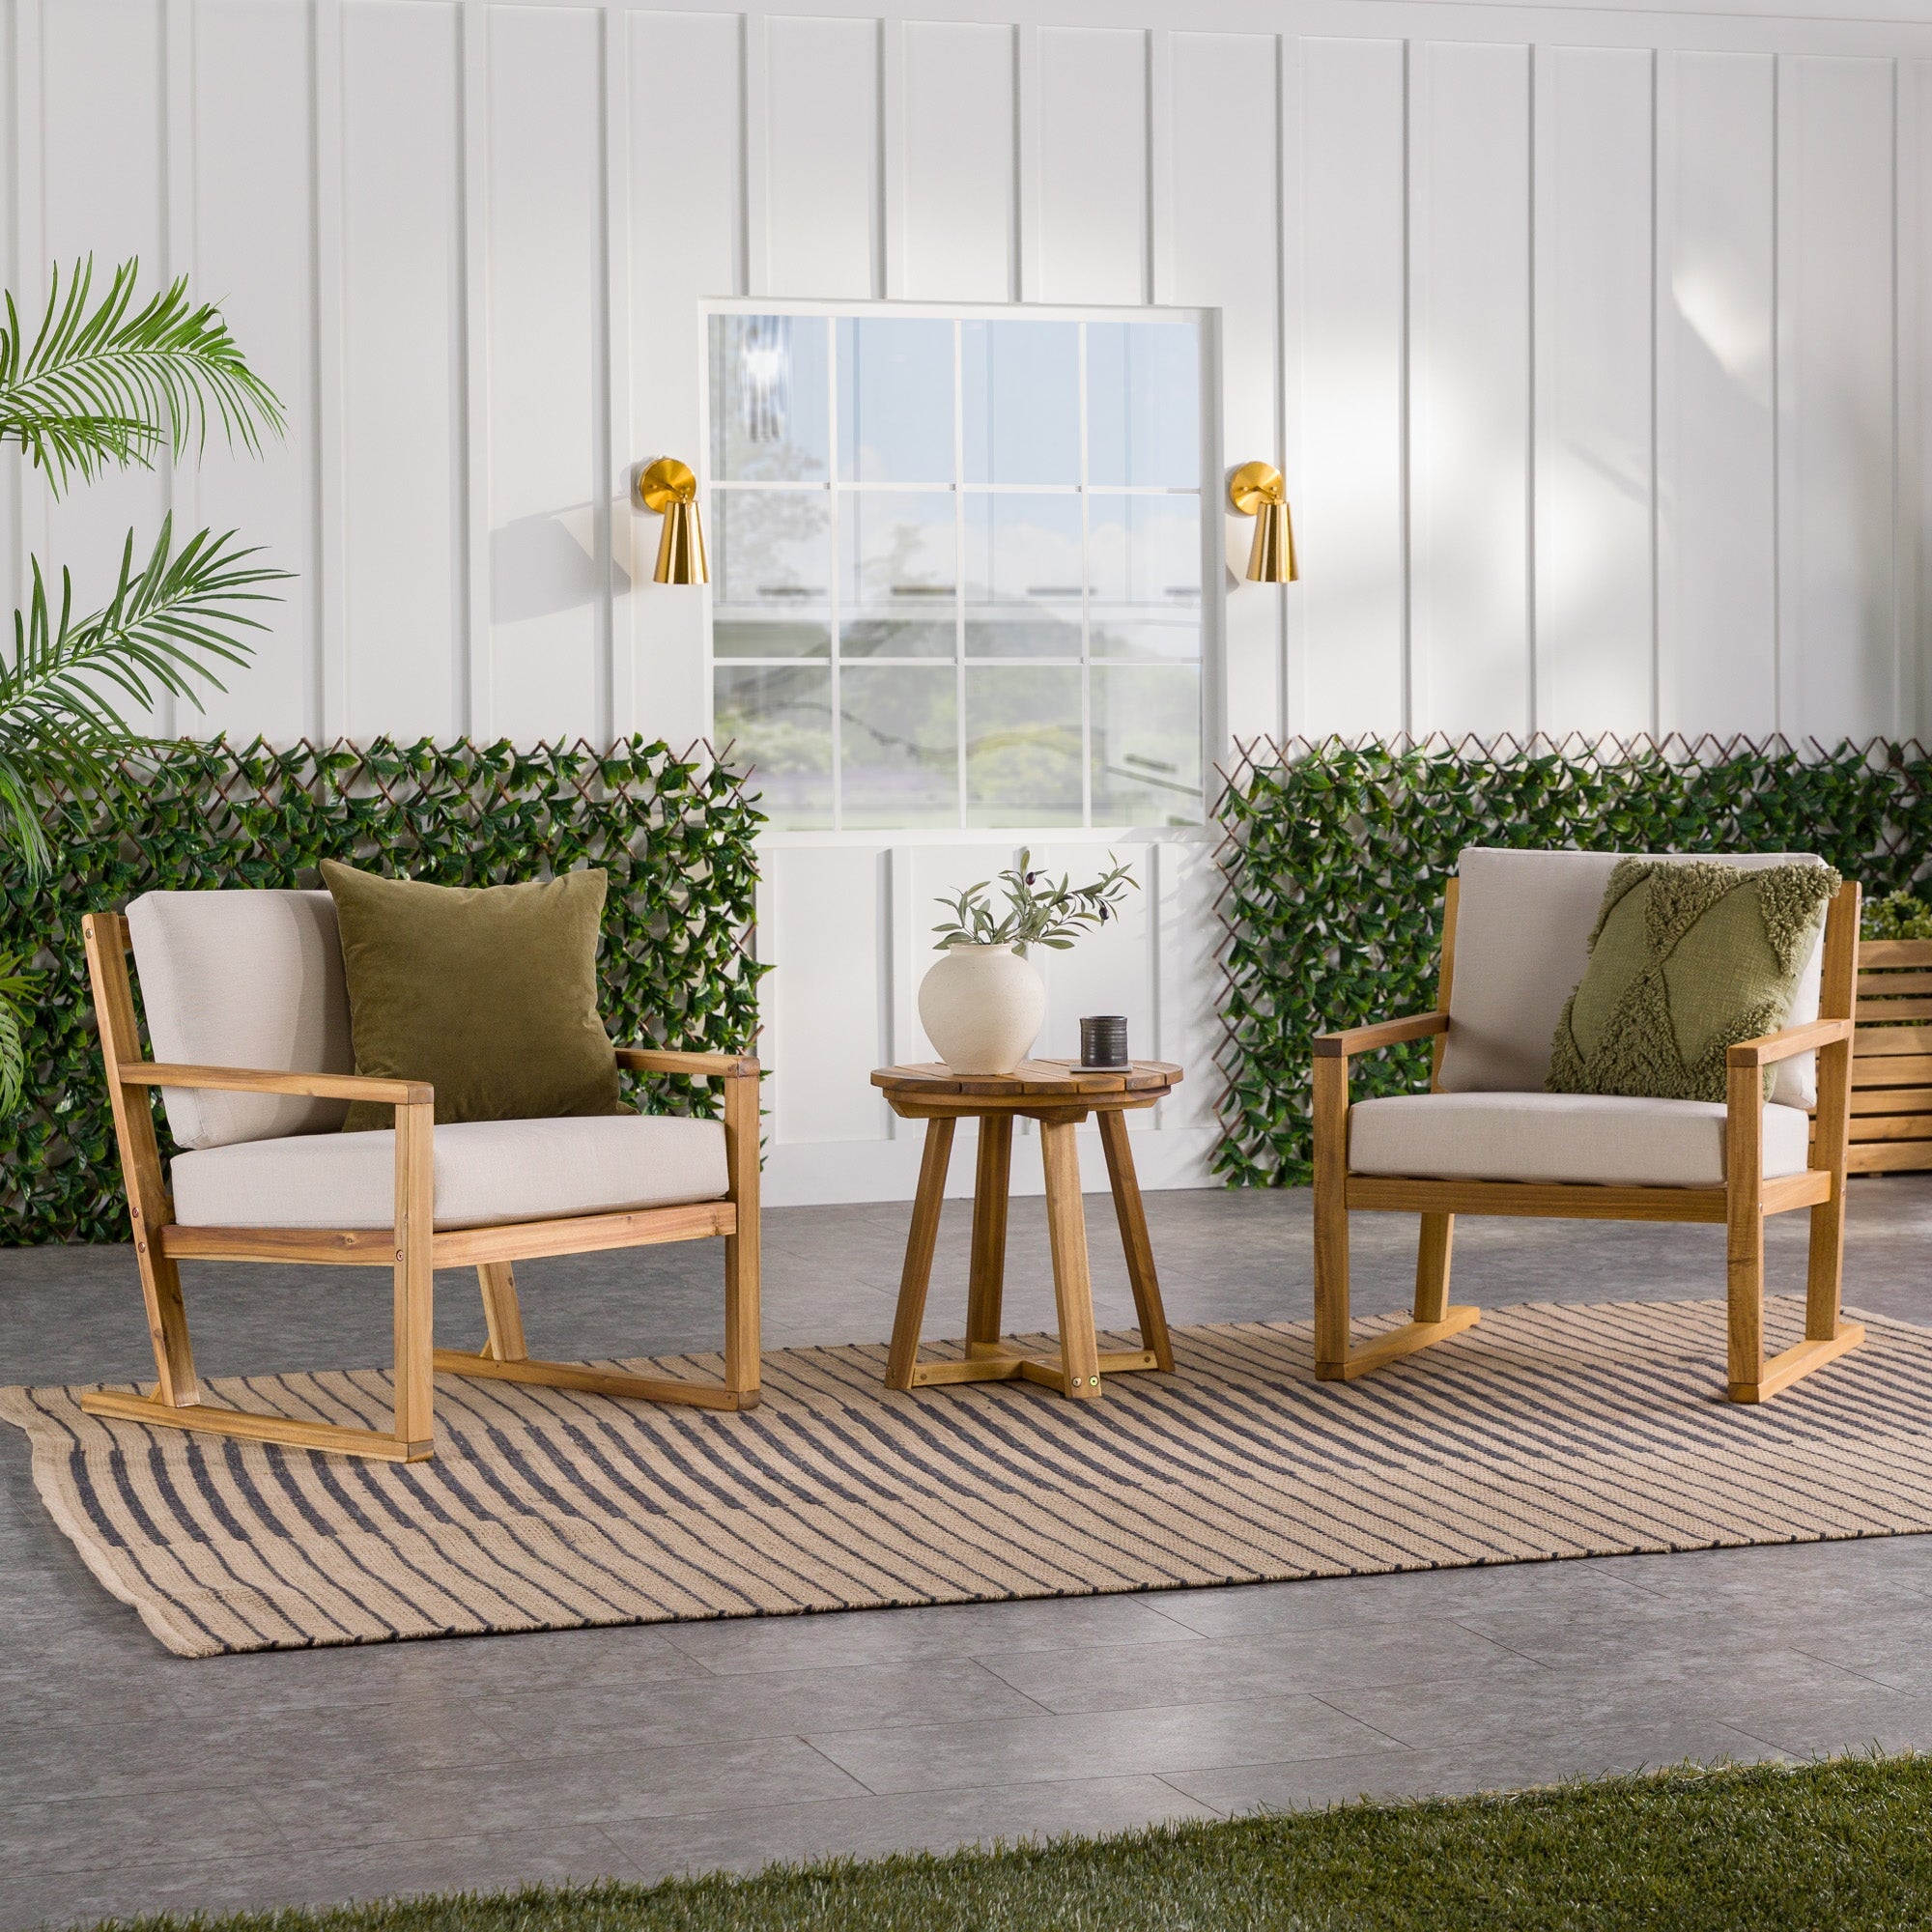 Walker Edison Prenton 3-Piece Modern Acacia Outdoor Slatted Chat Set with Side Table